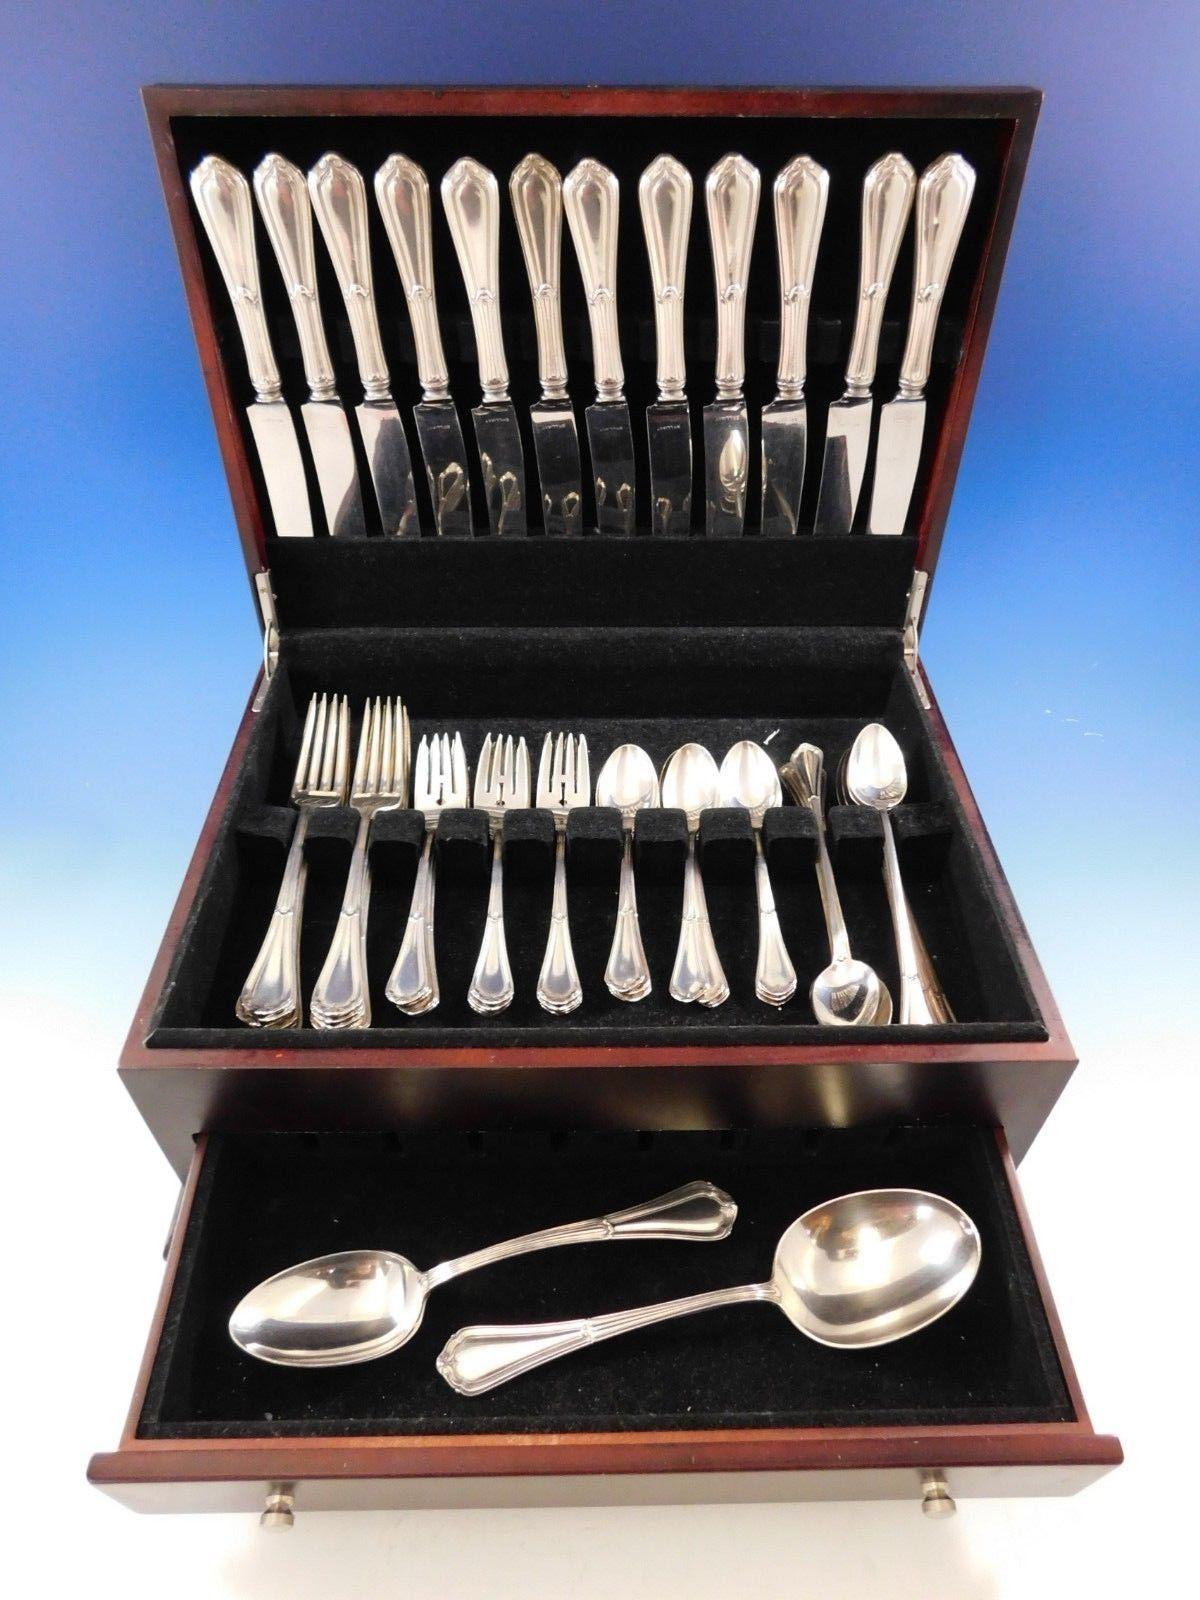 Lovely La Salle by Dominick and Haff sterling silver flatware set - 60 pieces. This set includes:

12 dinner knives, 9 3/4